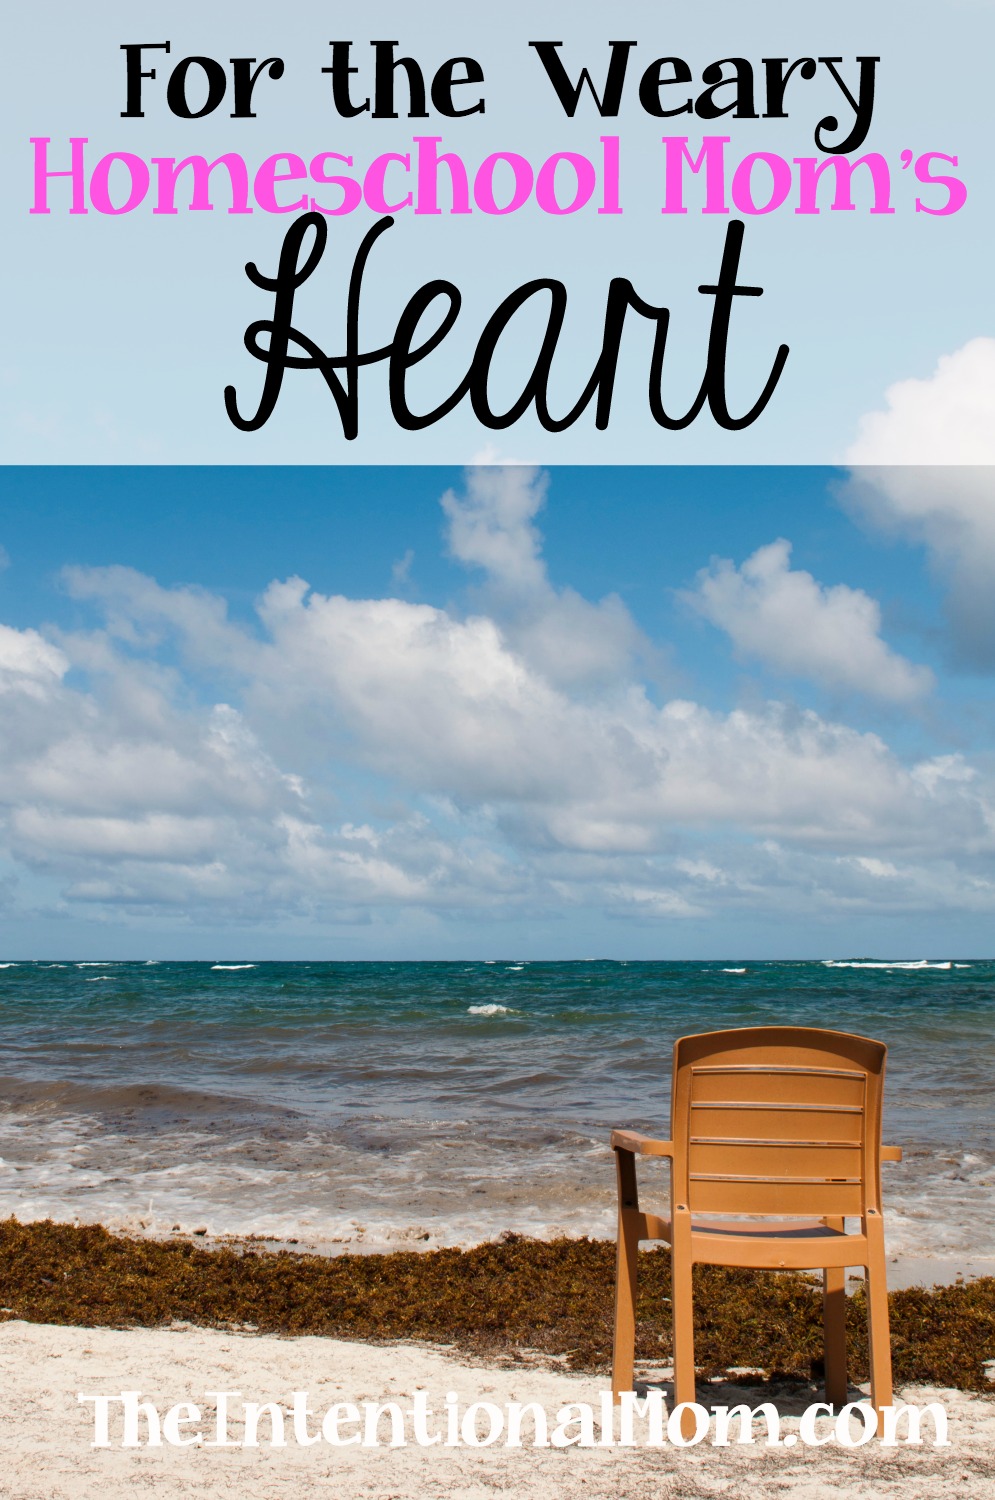 For the Weary Homeschool Mom’s Heart